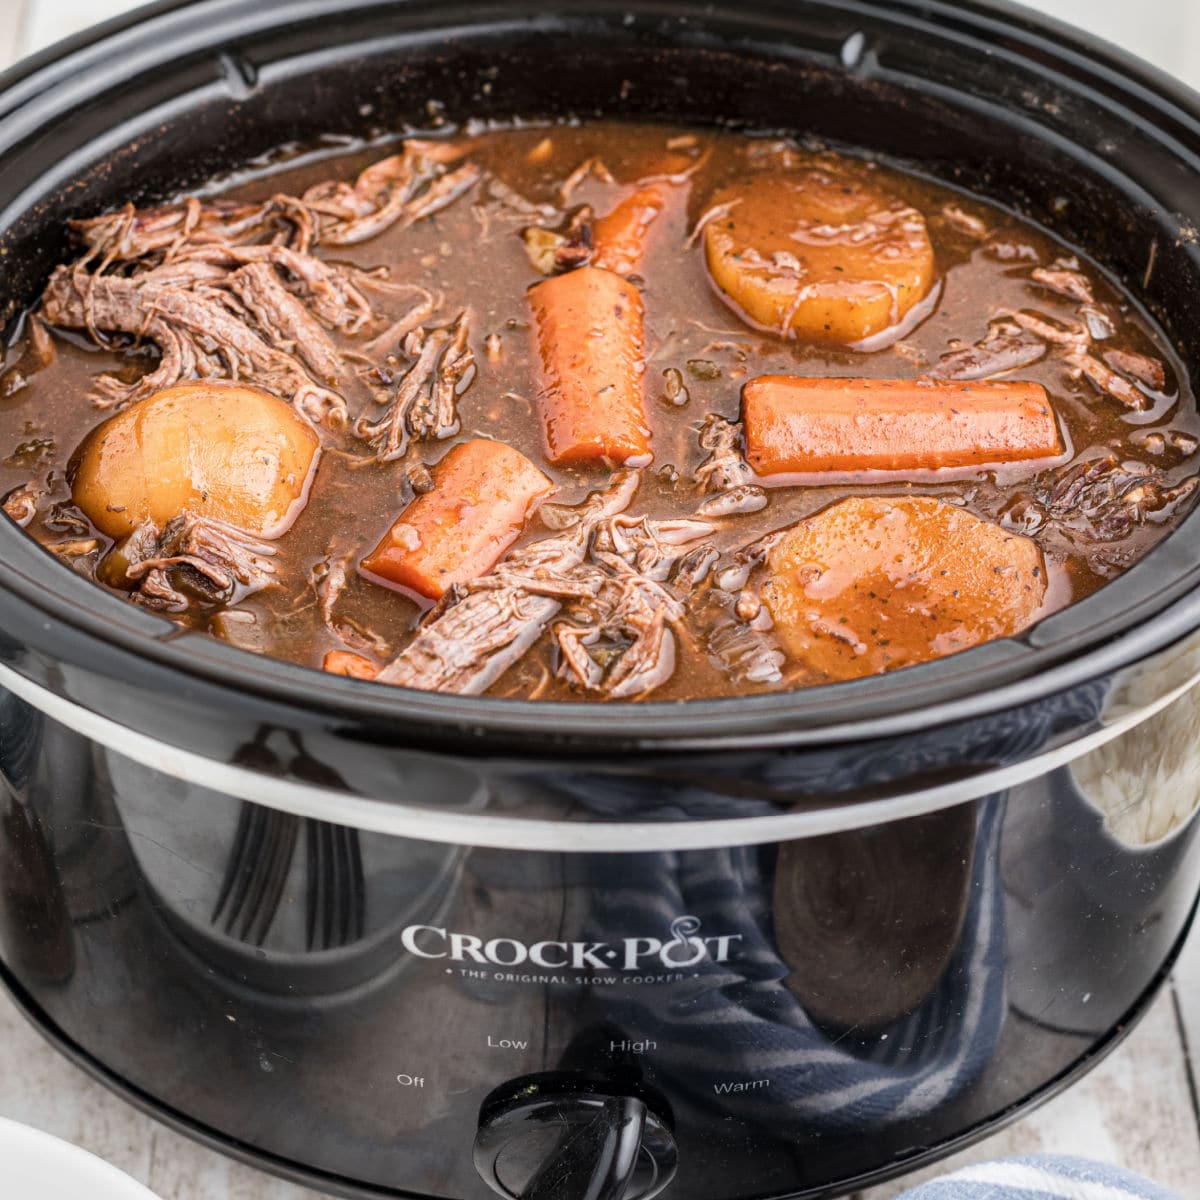 https://thecaglediaries.com/wp-content/uploads/2023/02/Slow-Cooker-Venison-Roast-with-Red-Wine-Featured-Image.jpg